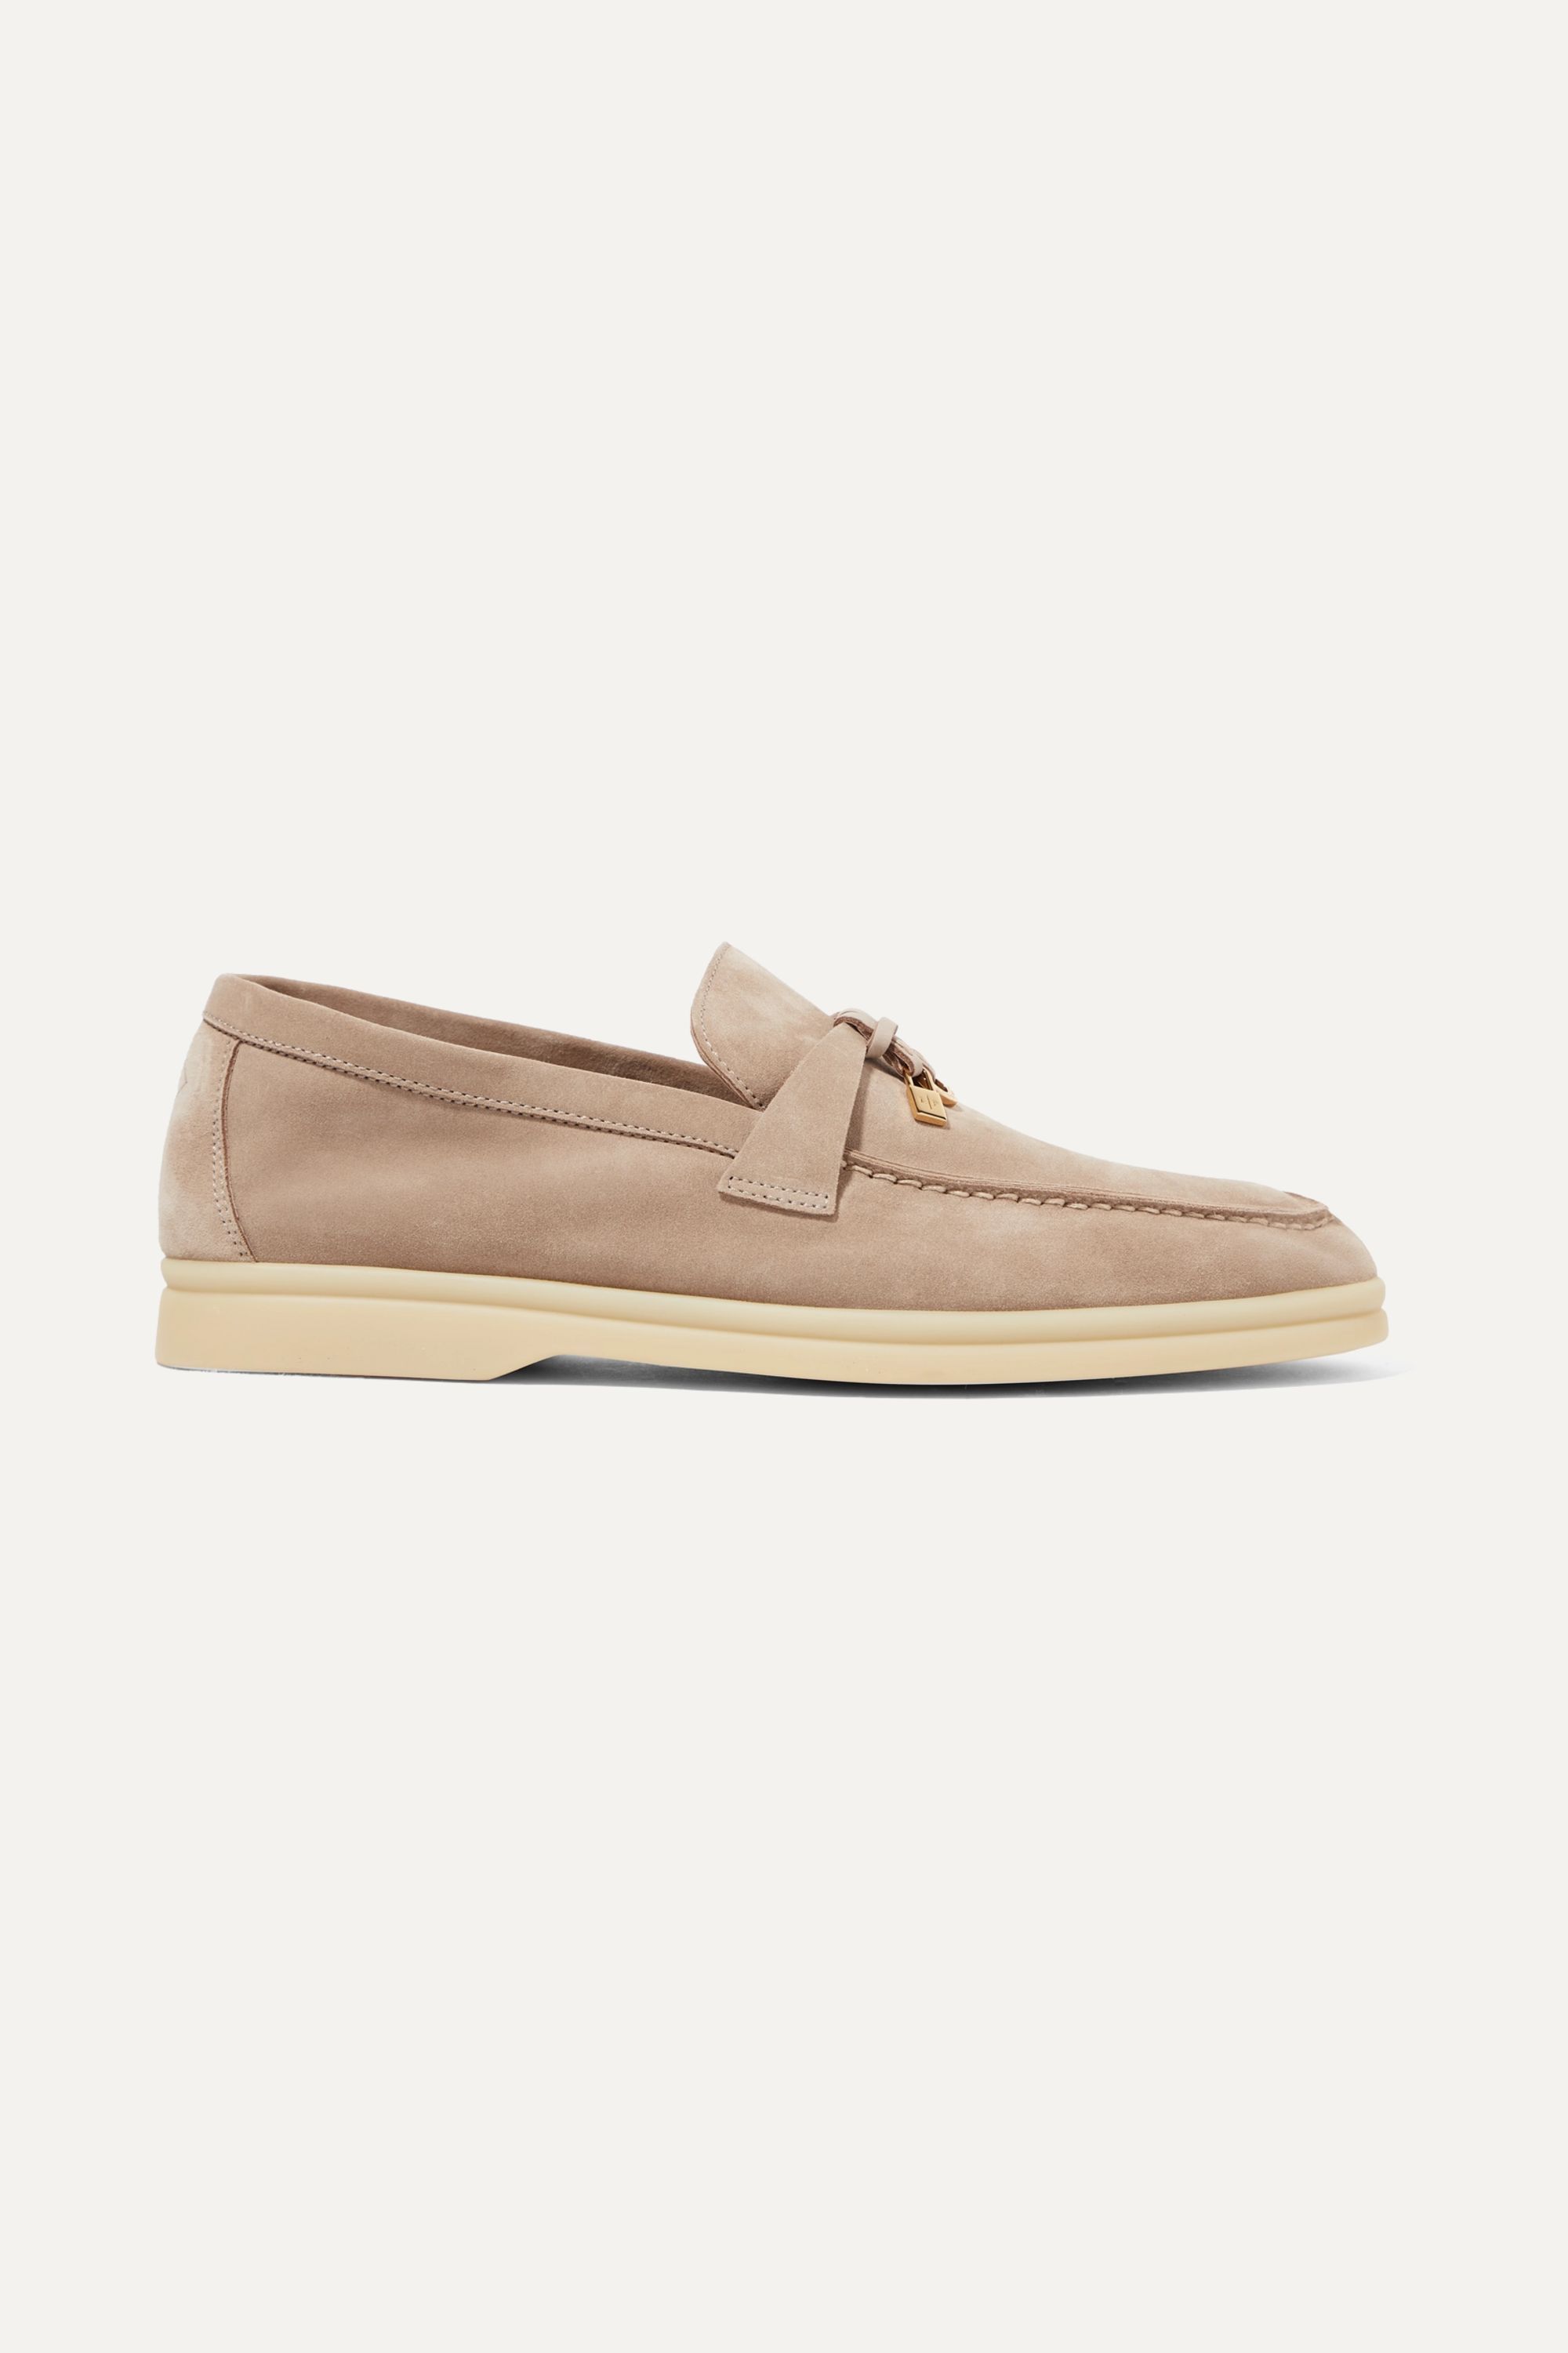 Summer Charms suede loafers | NET-A-PORTER (UK & EU)